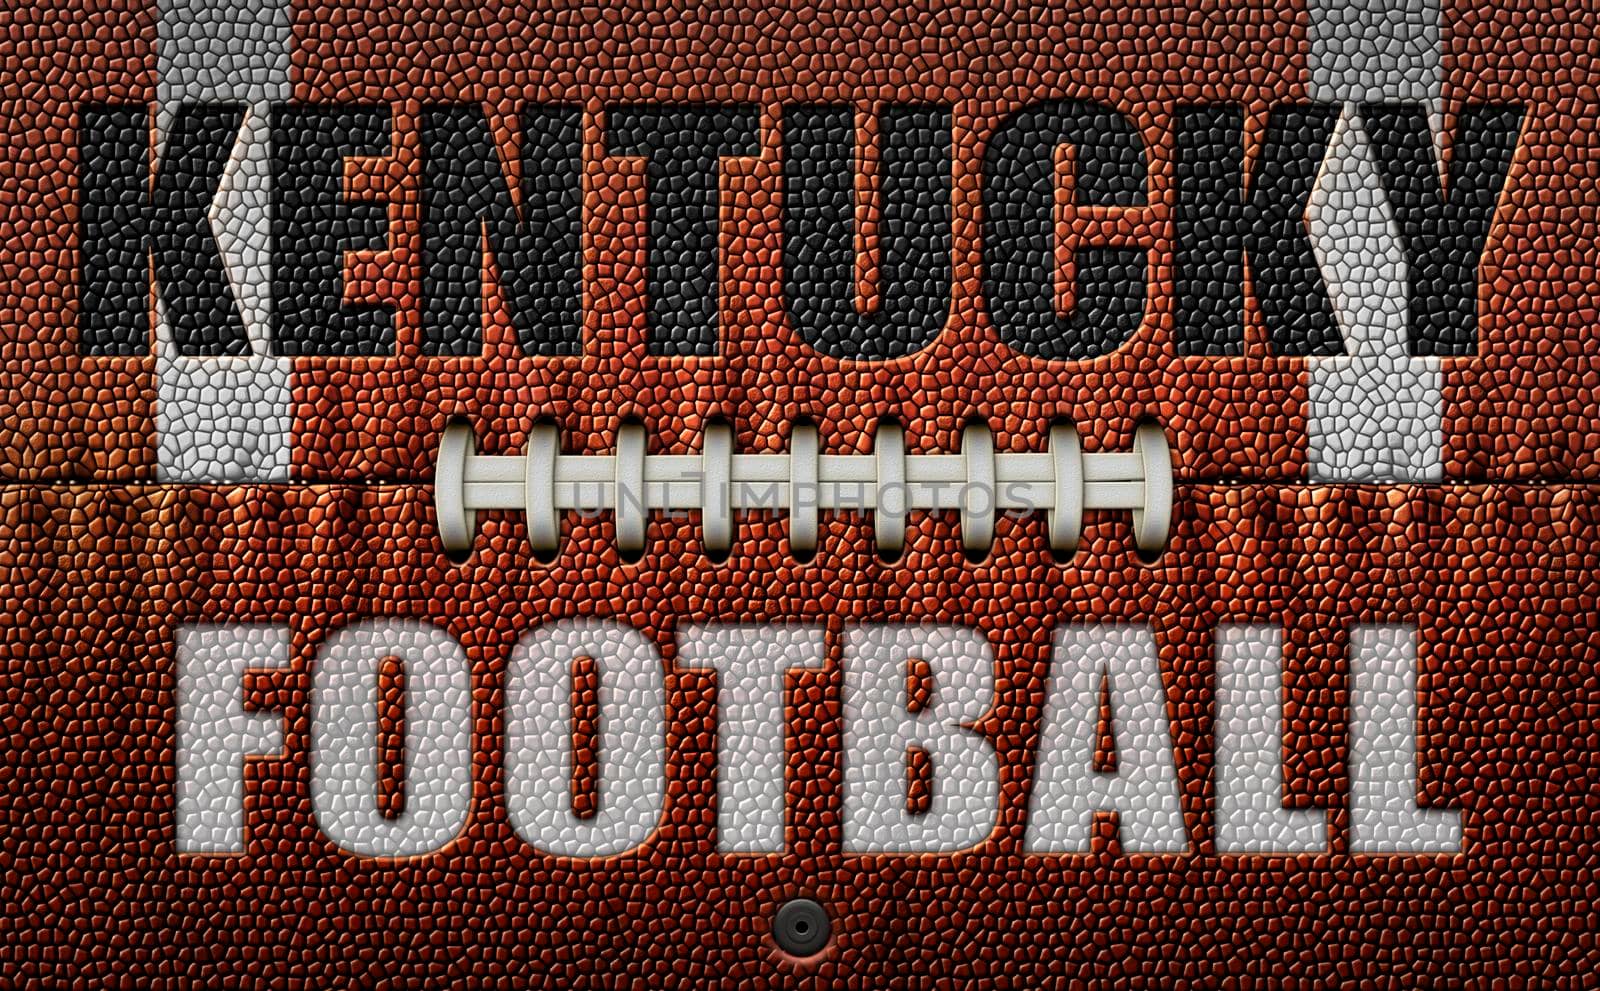 The words, Kentucky Football, embossed onto a football flattened into two dimensions. 3D Illustration